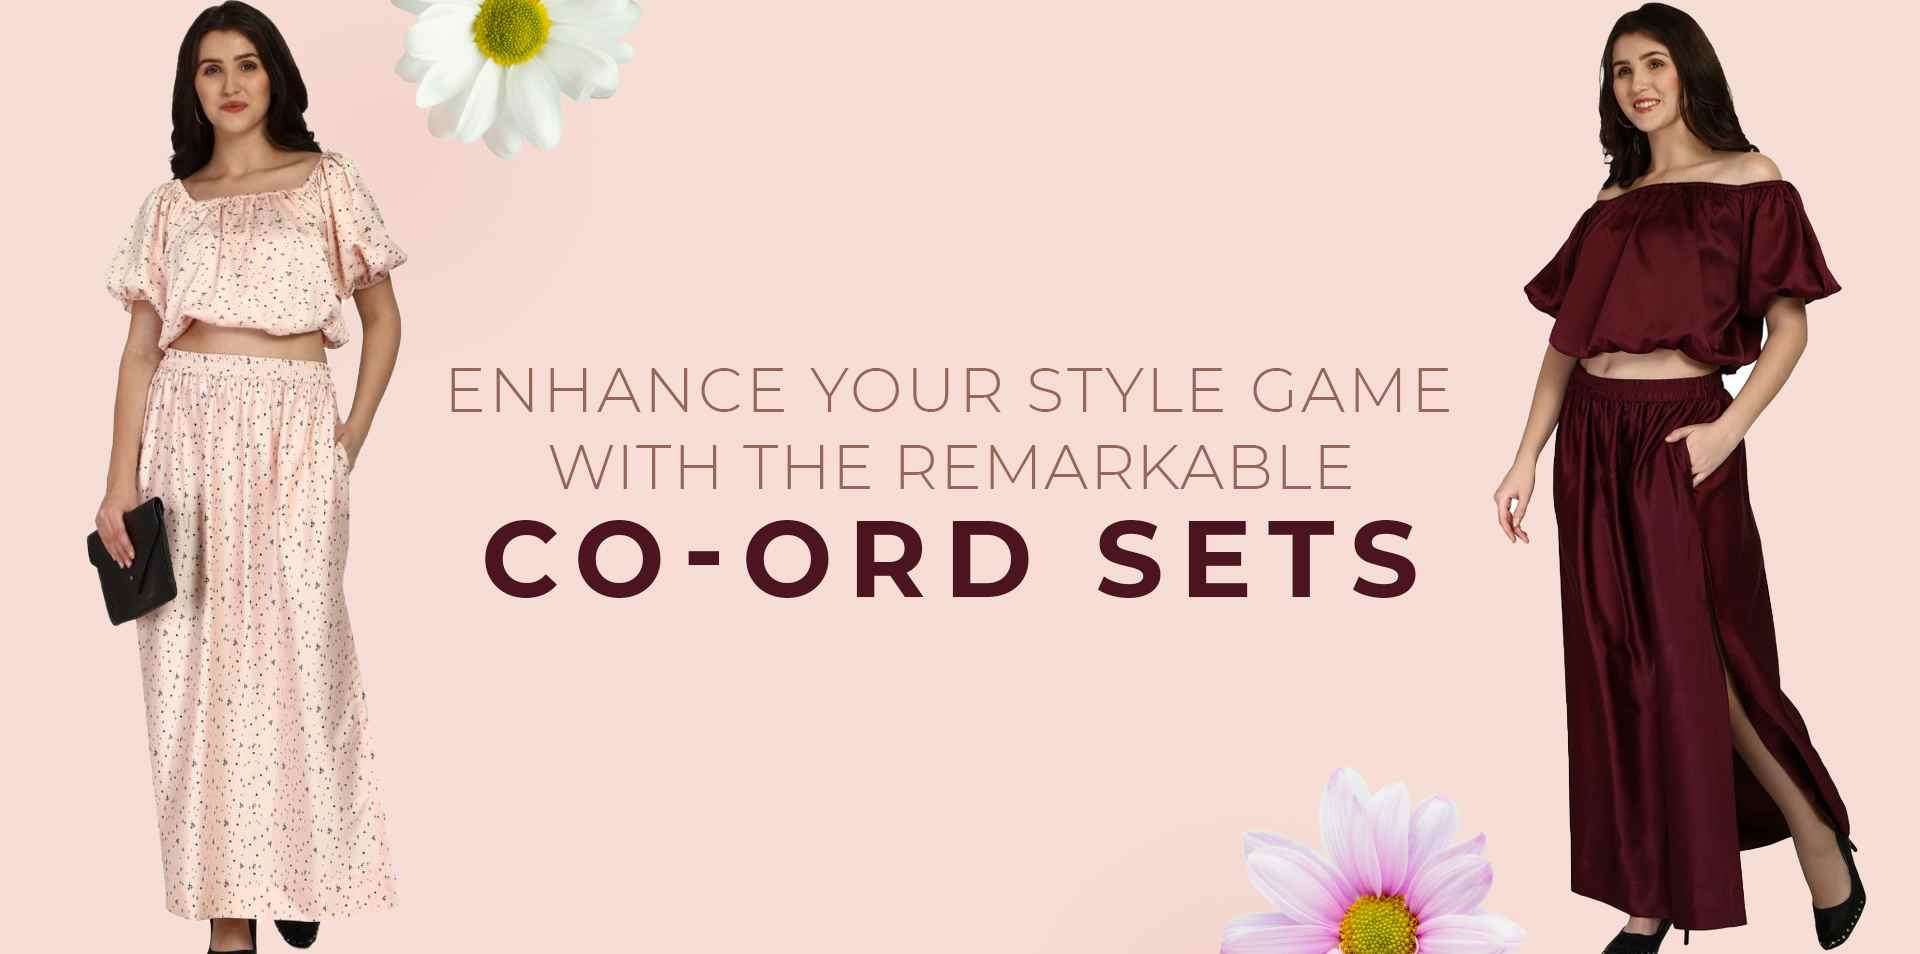 Enhance Your Style Game With Remarkable Co-ord Sets